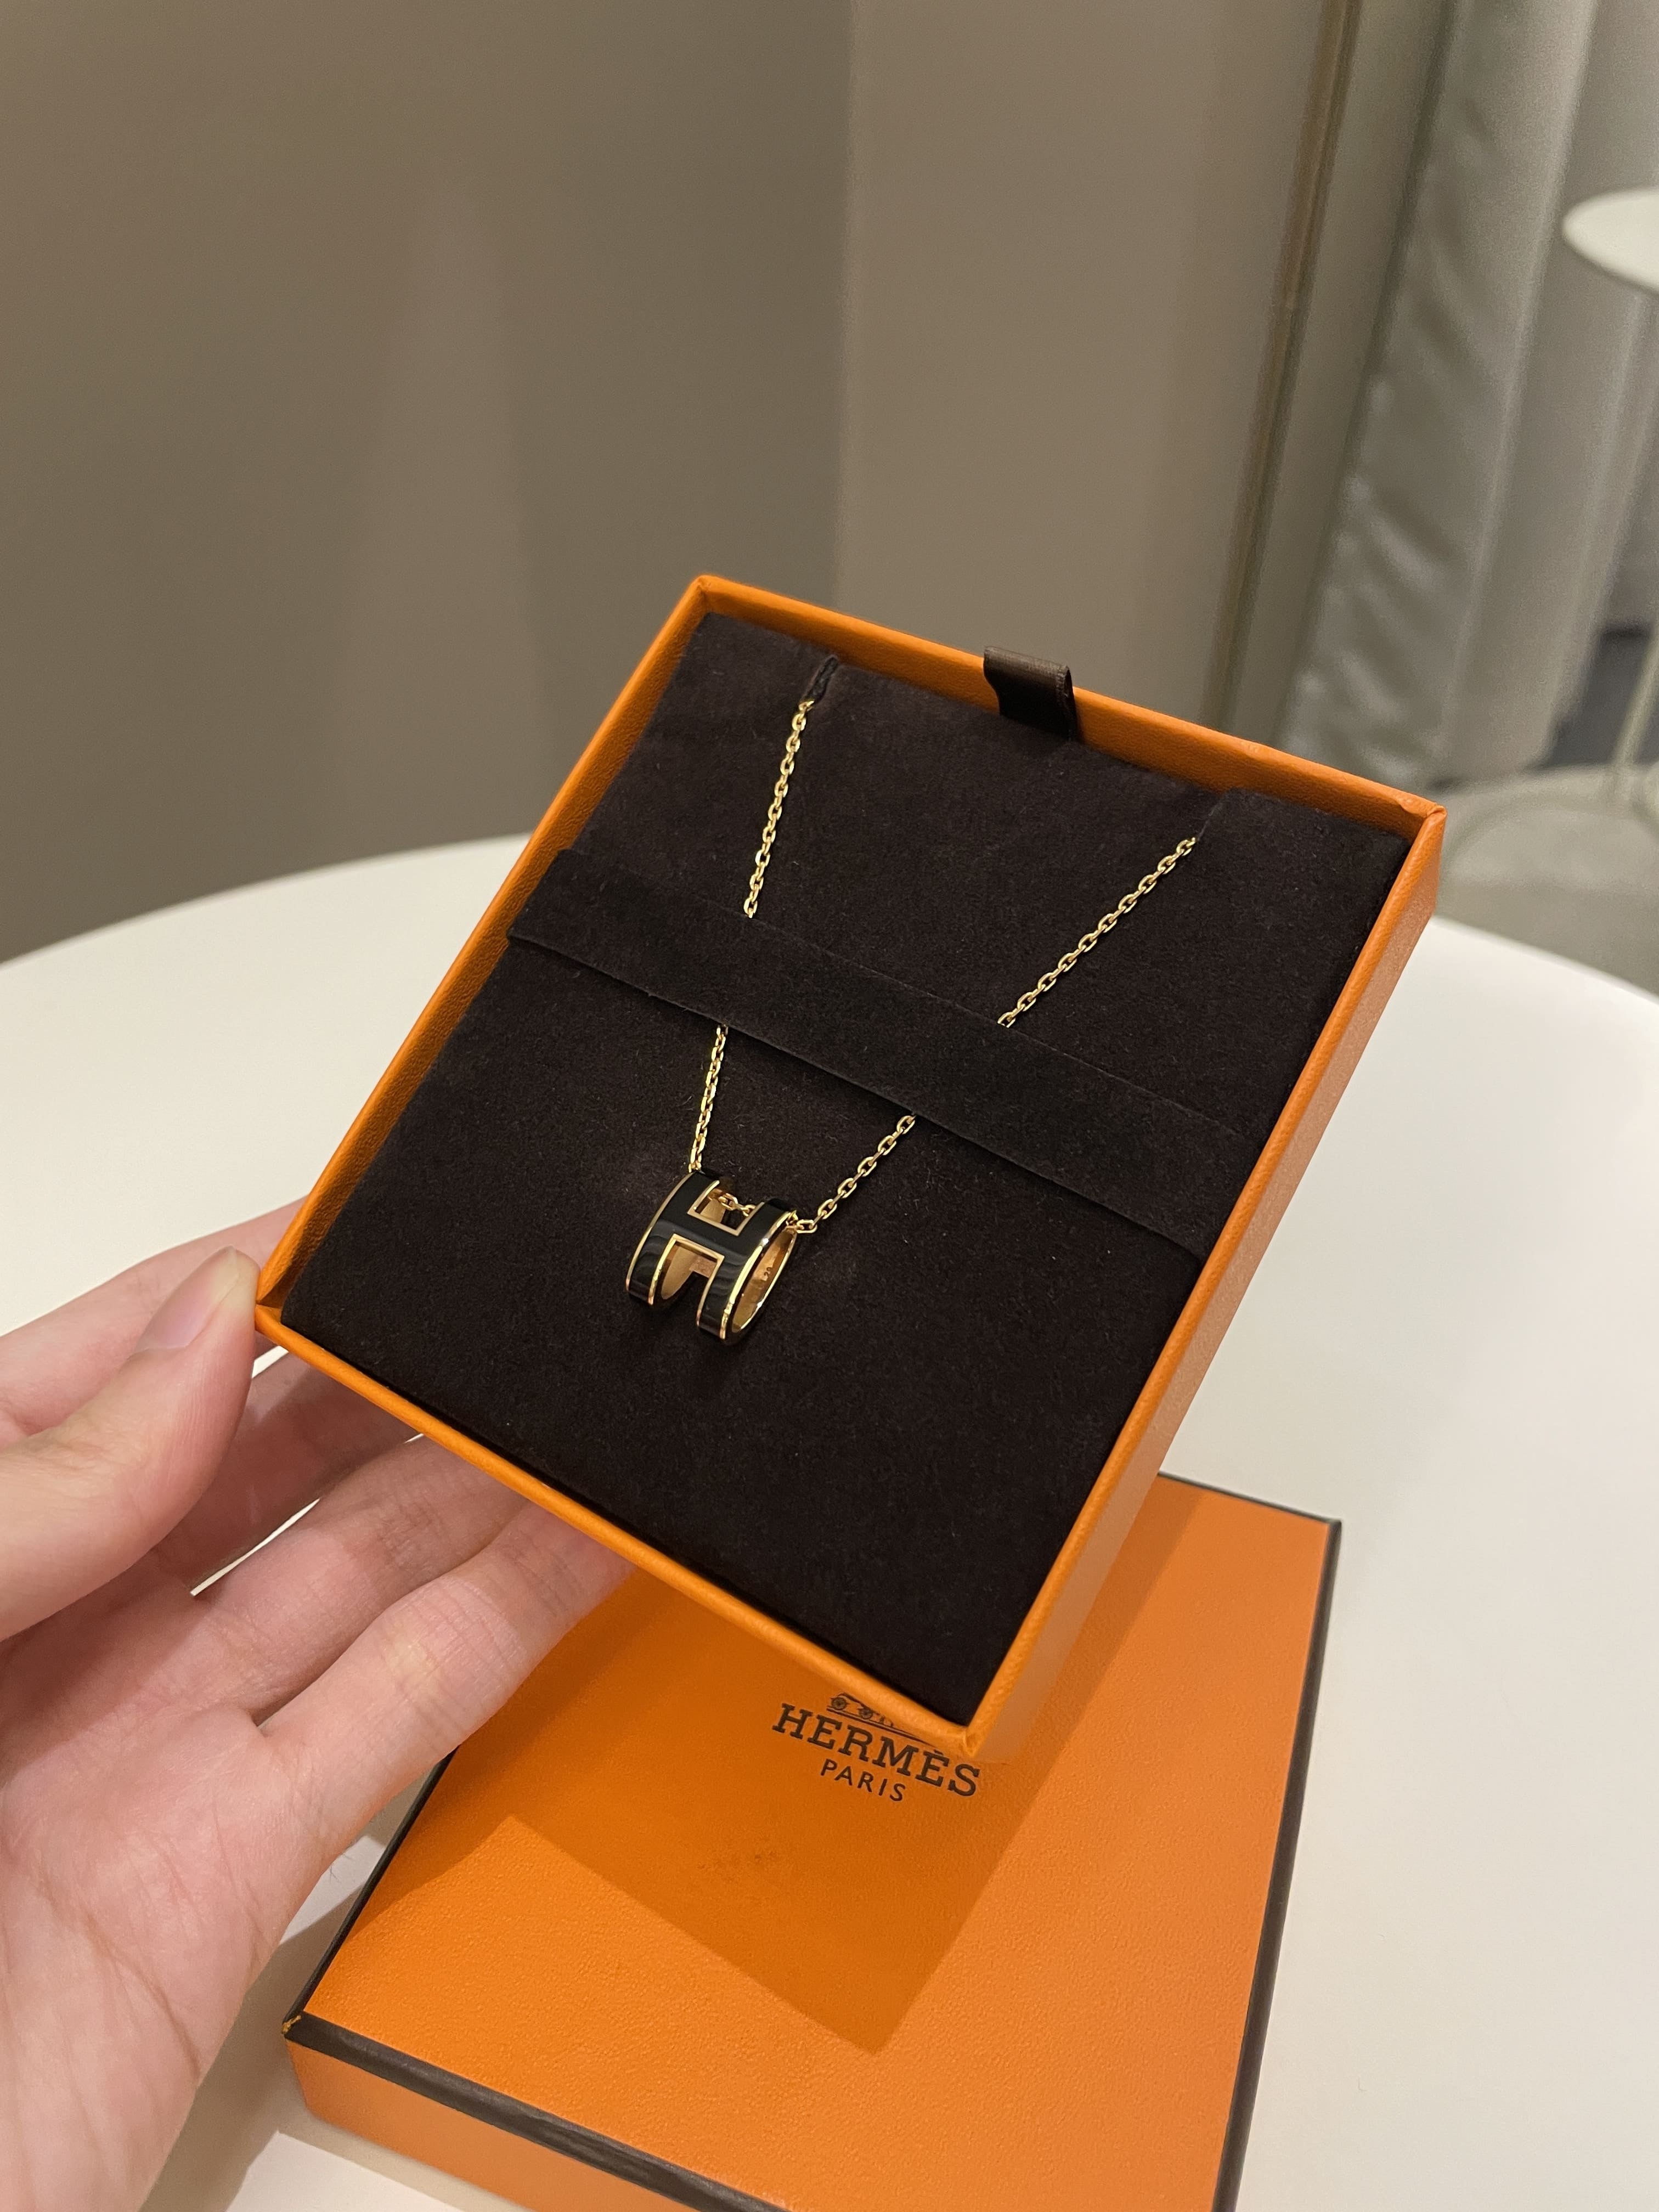 Hermes Pop H Necklace (Purple and Gold) | Rent Hermes jewelry for $55/month  - Join Switch